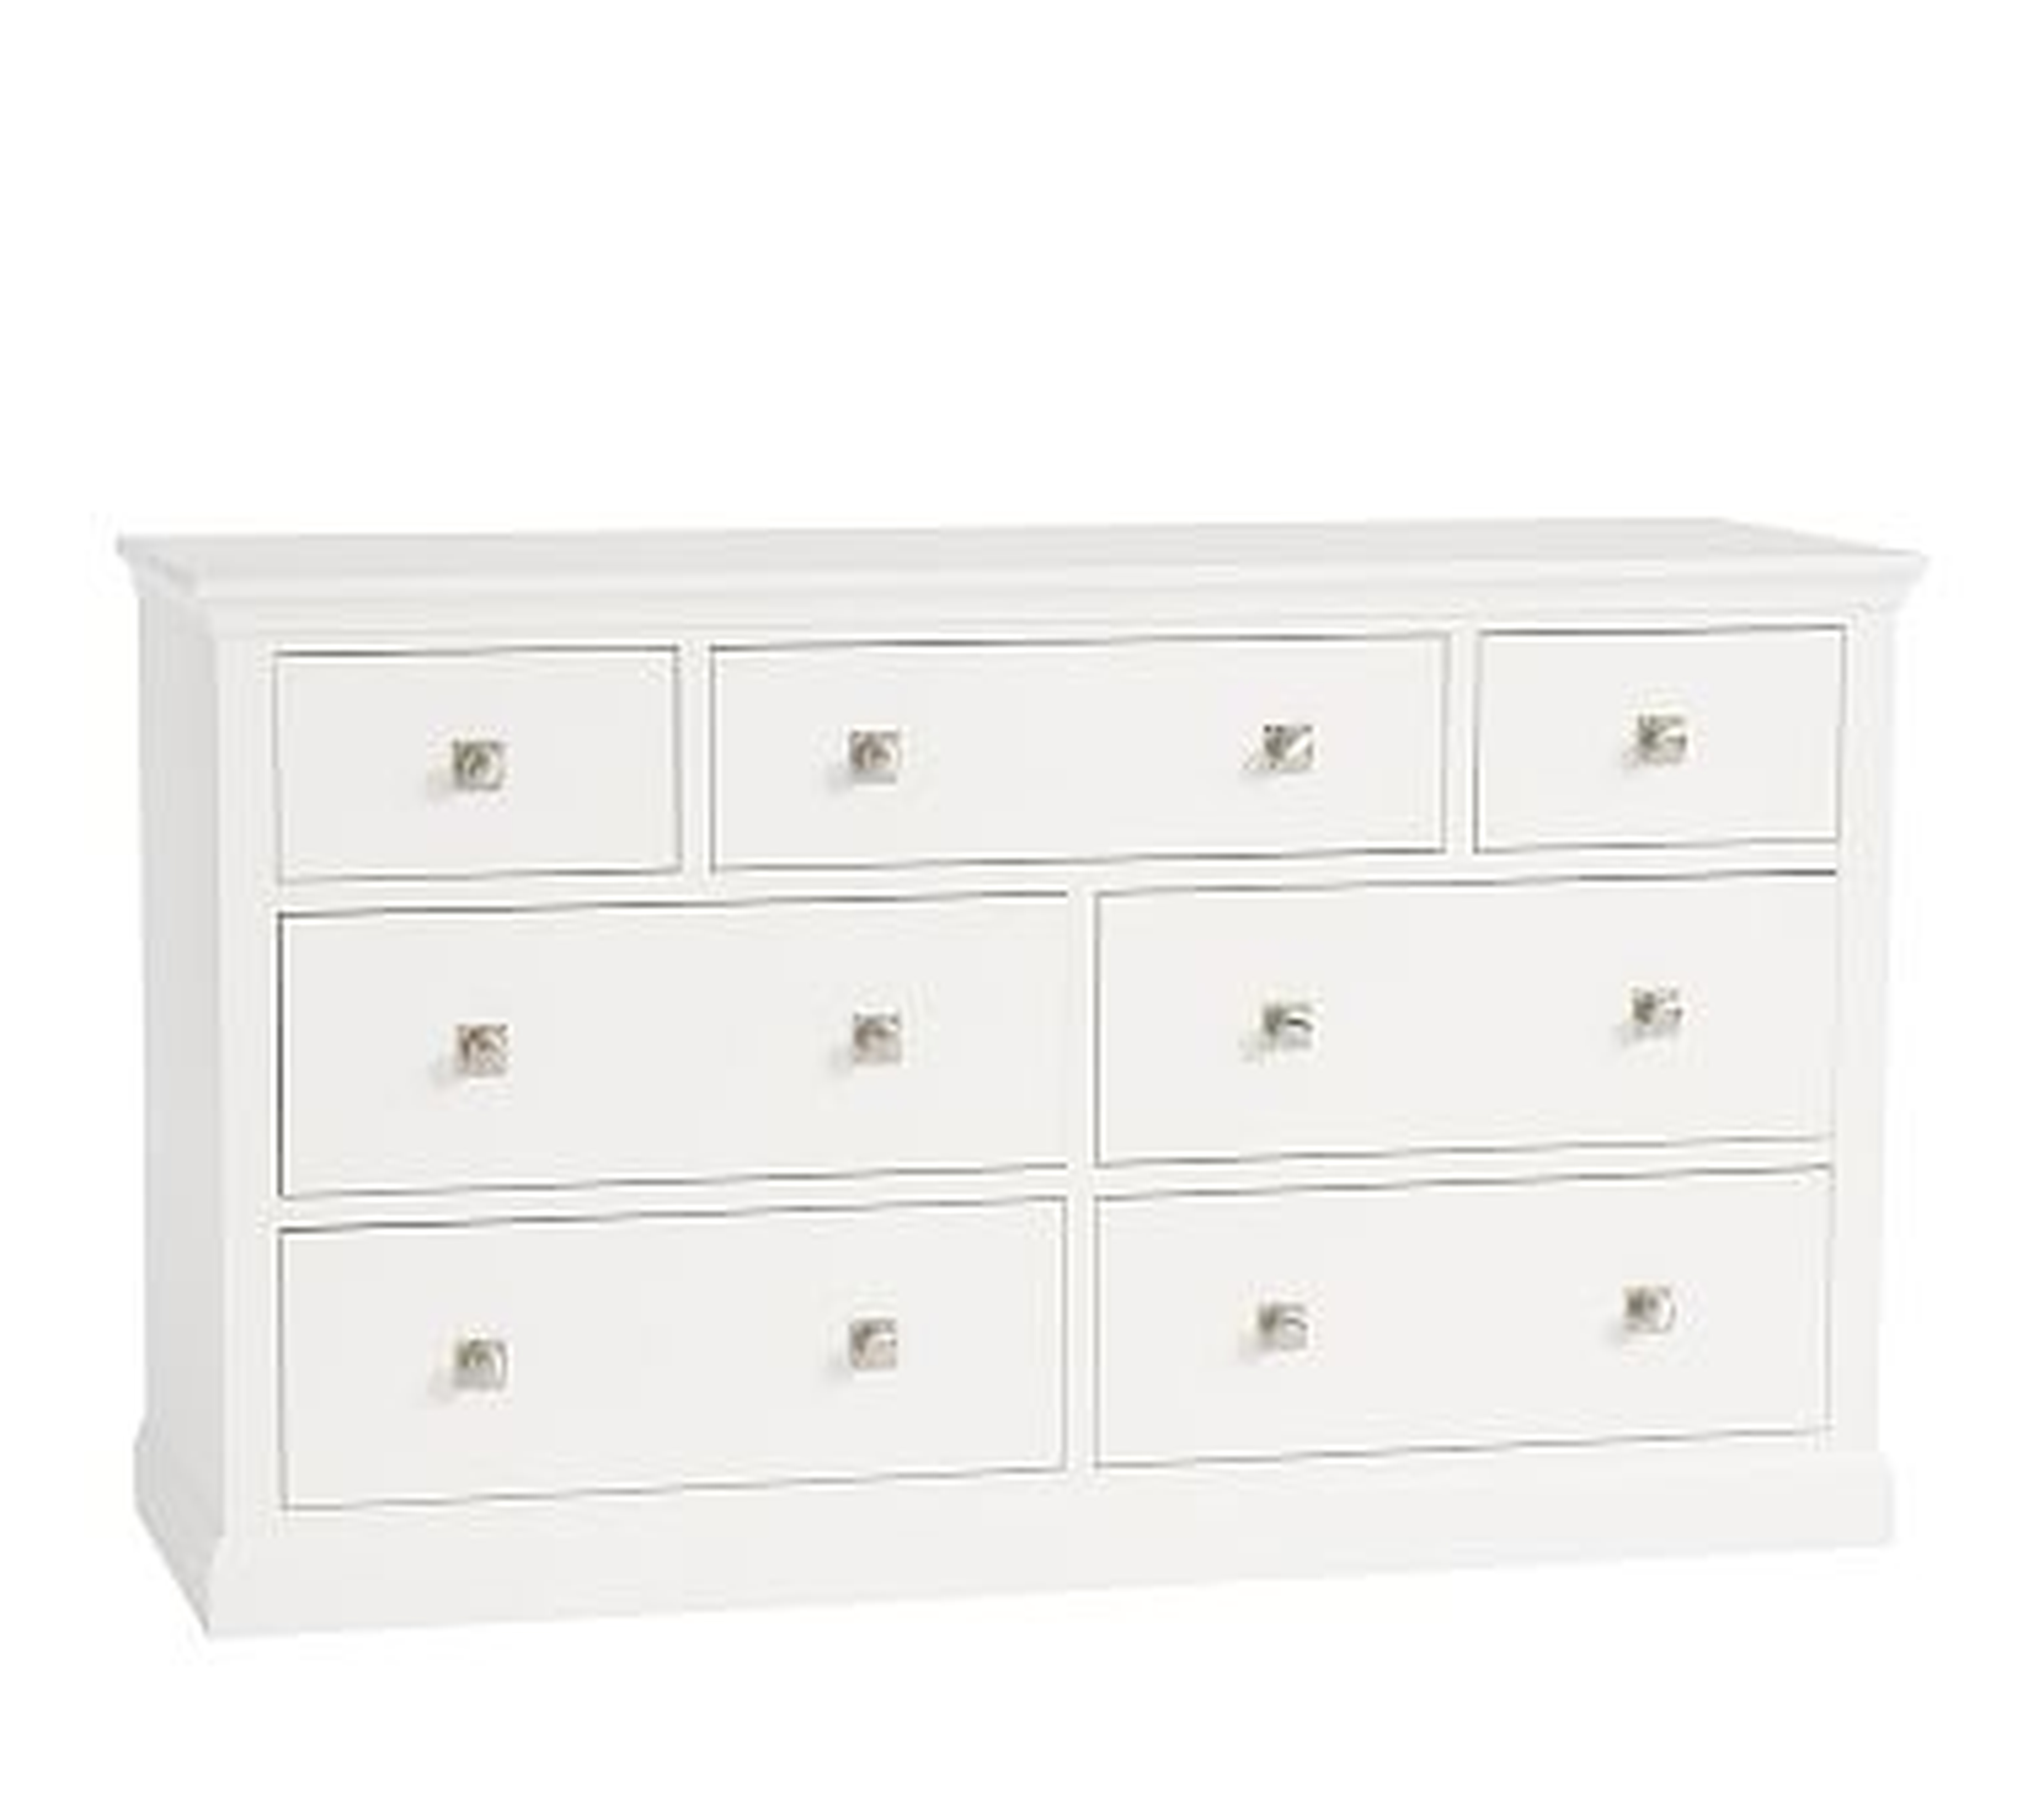 Charlie Extra Wide Dresser, Simply White, Flat Rate - Pottery Barn Kids